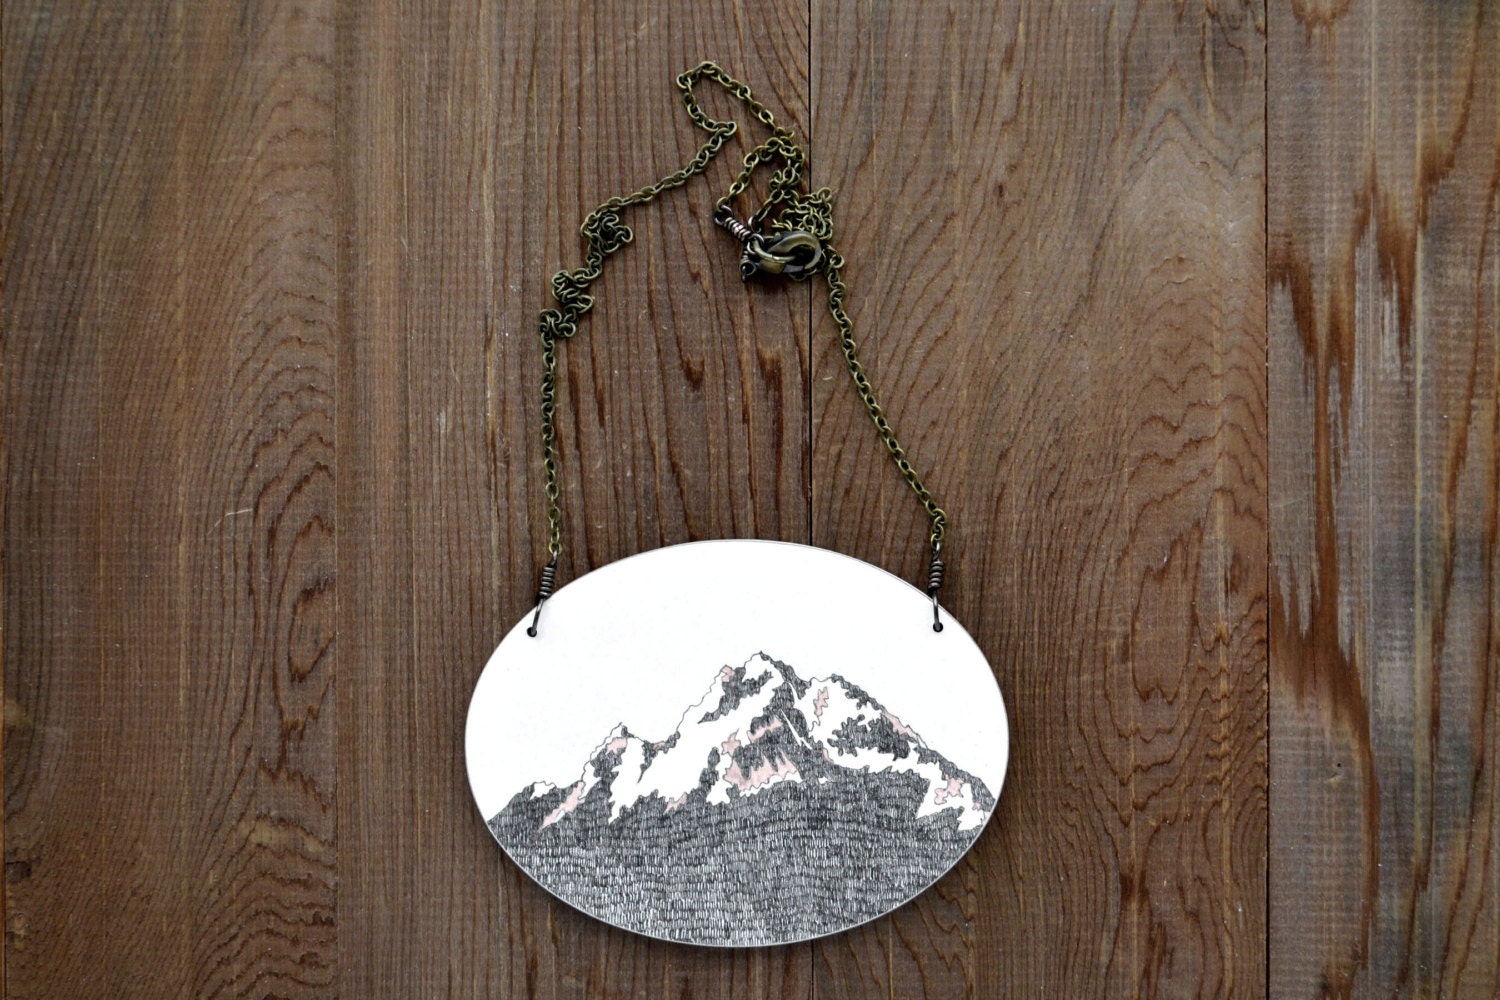 Large Mountain Necklace in Pink and Graphite - Hand Painted Mountain Artwork Pendant